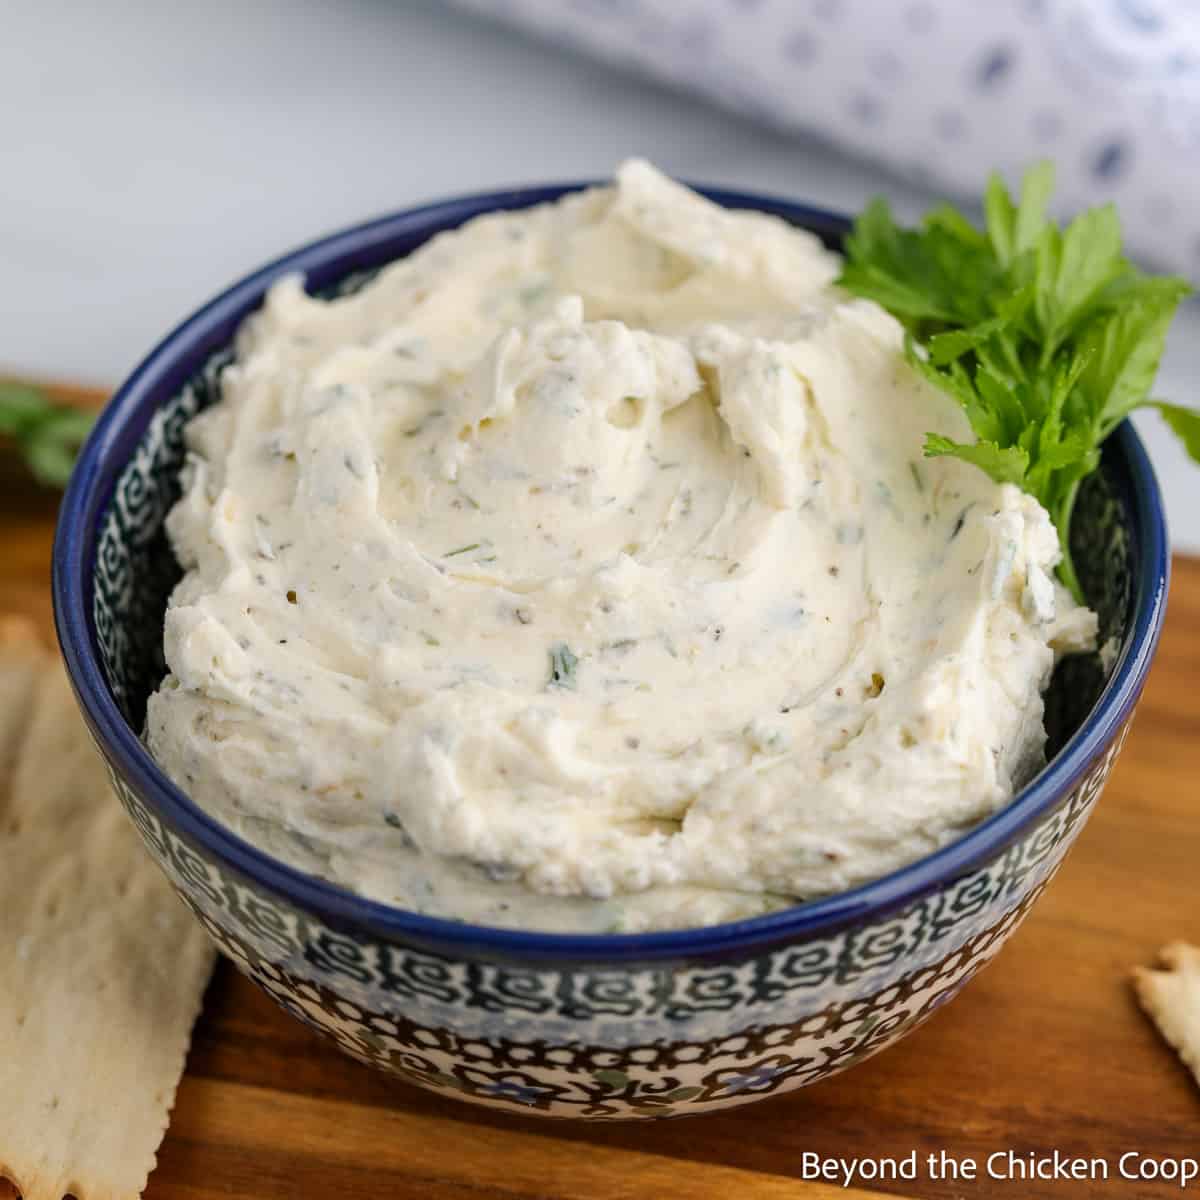 A bowl filled with a creamy spread.